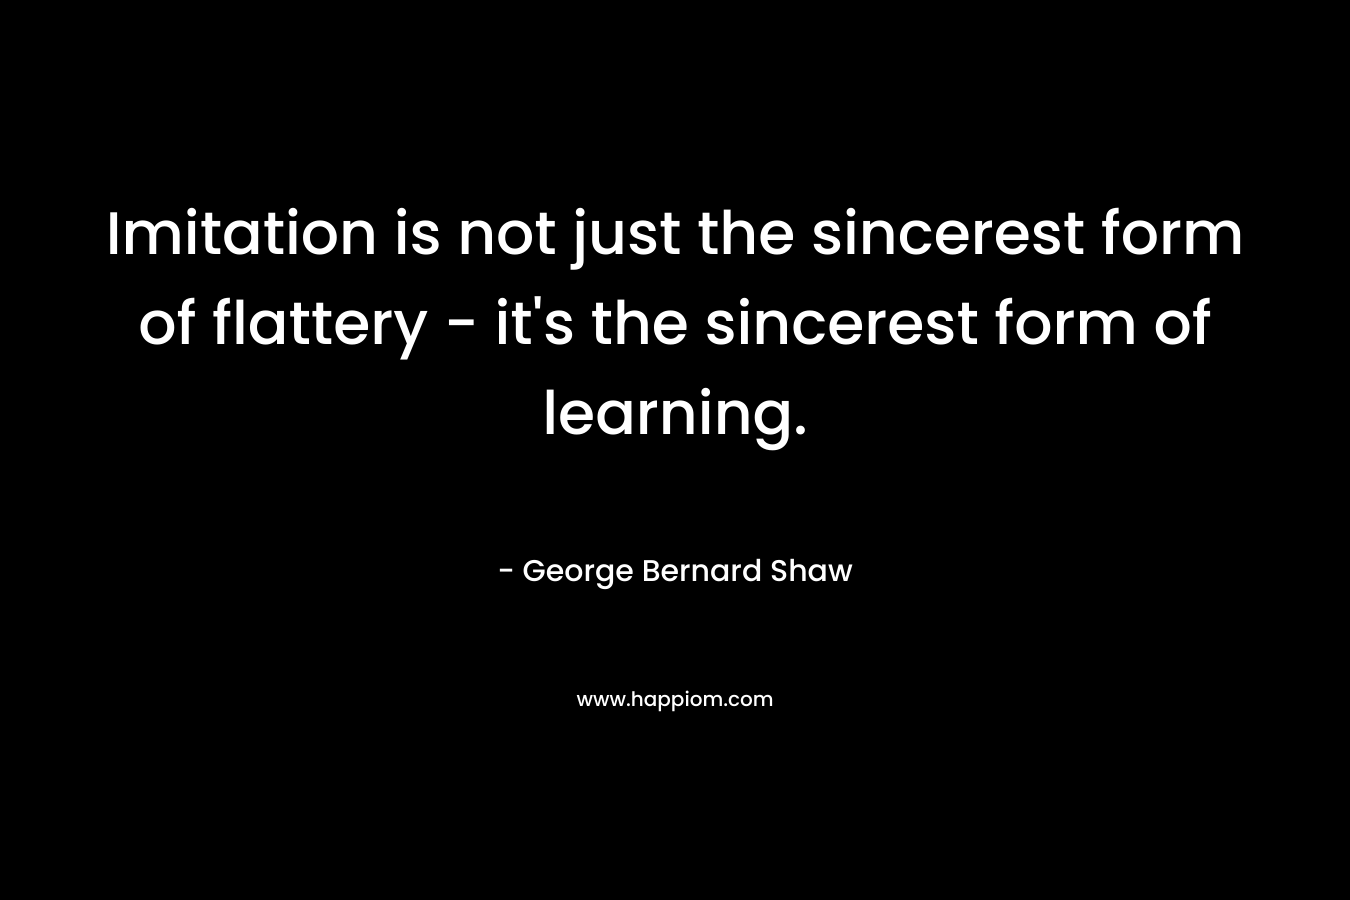 Imitation is not just the sincerest form of flattery – it’s the sincerest form of learning. – George Bernard Shaw